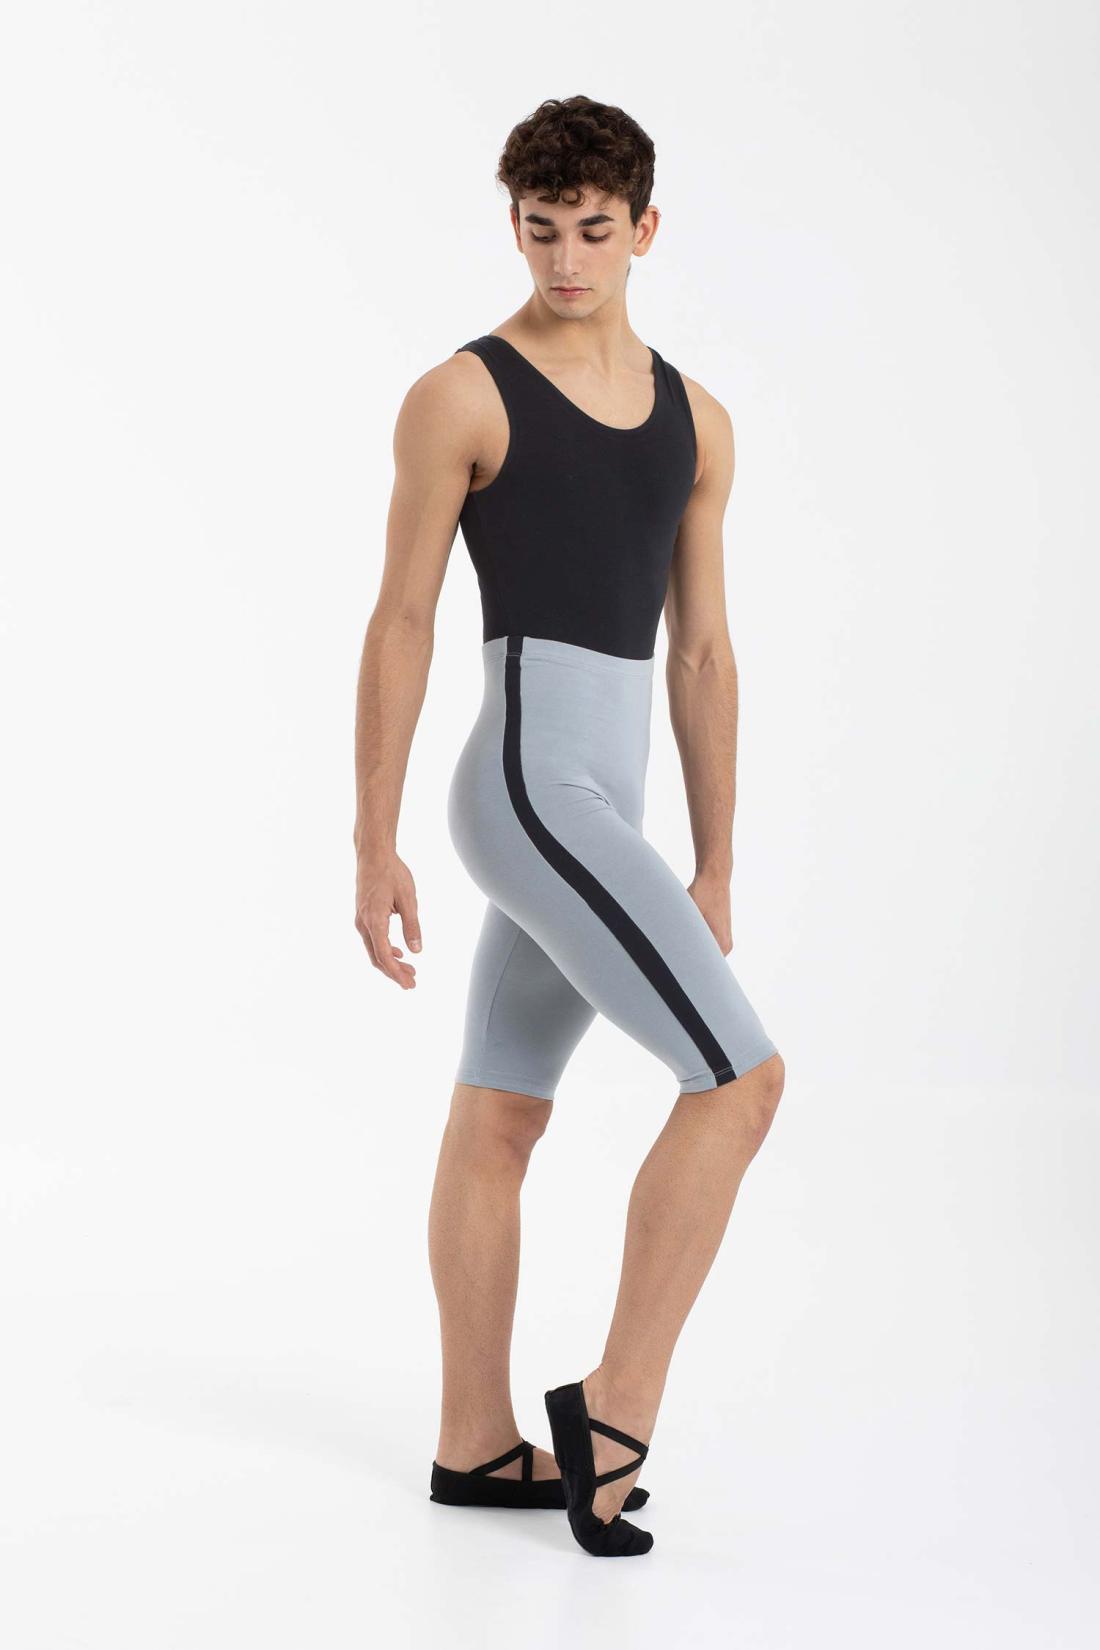 Over-the-knee Men's Pants with stripe on the sides for Male Dancers in Organic Cotton Intermezzo Ballet Dance